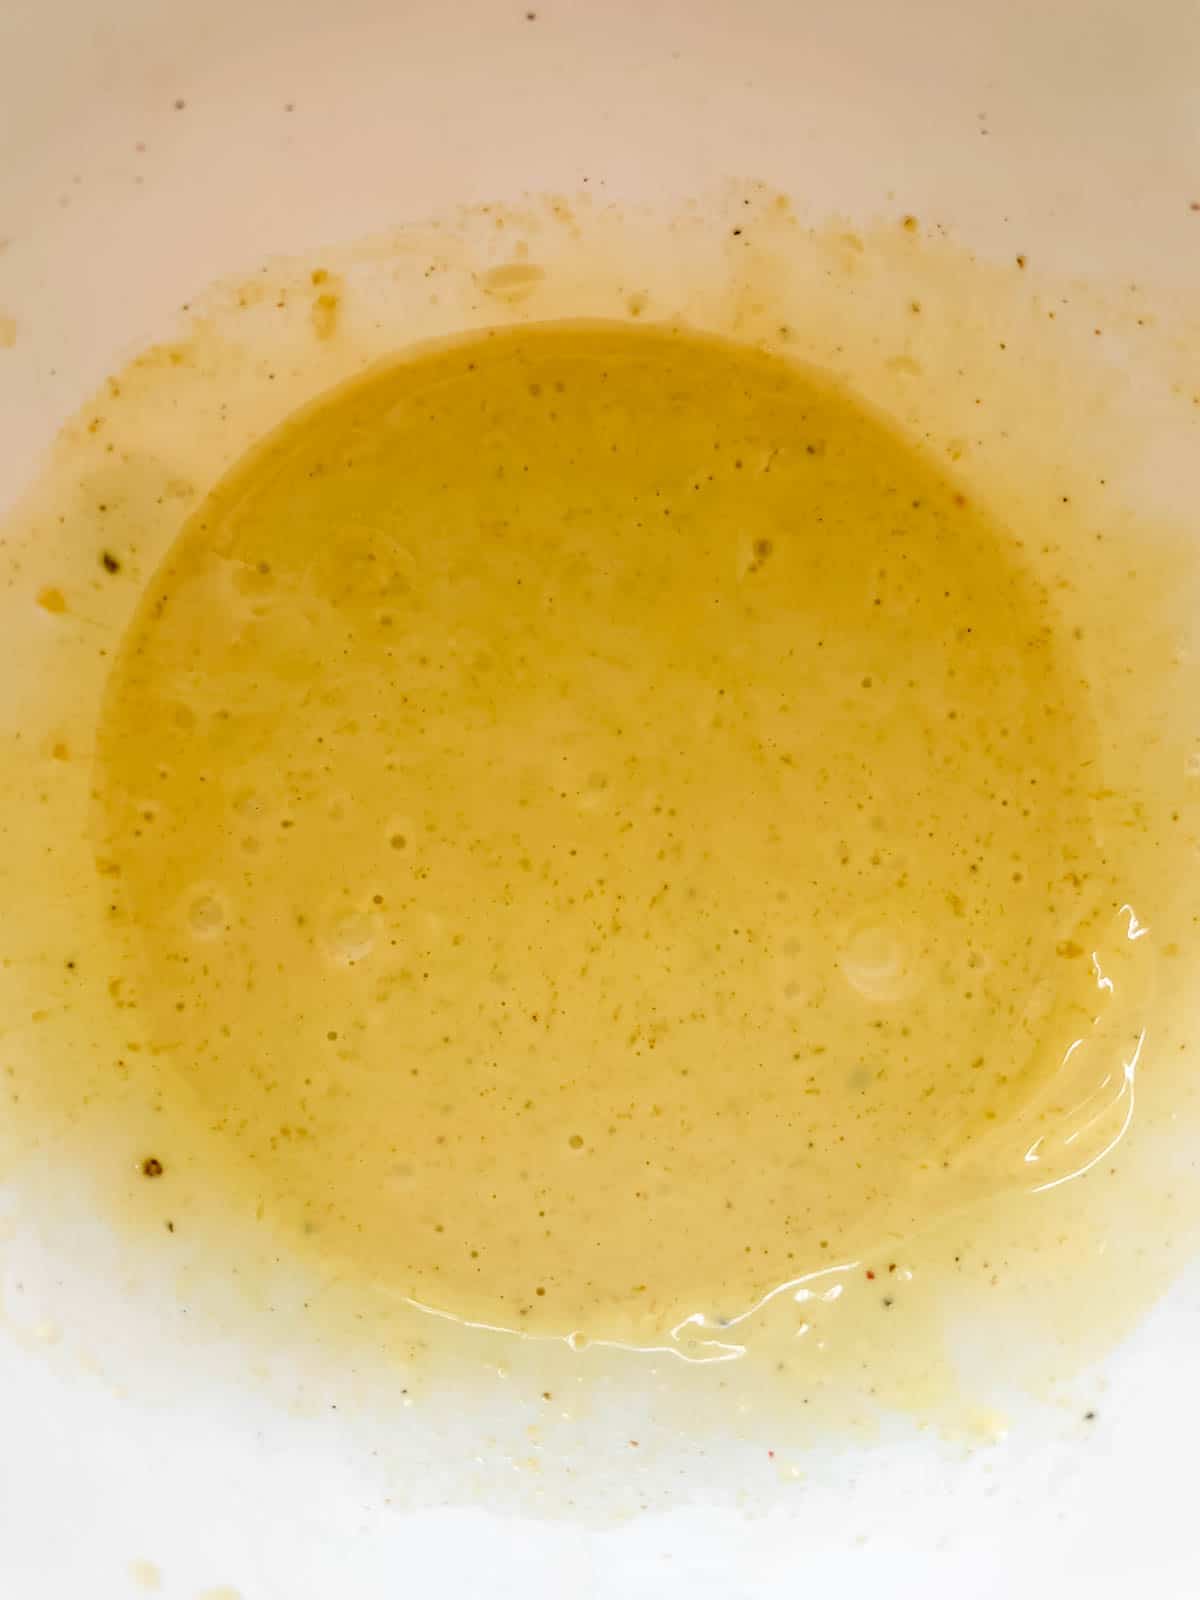 The dressing mixed together in a bowl.